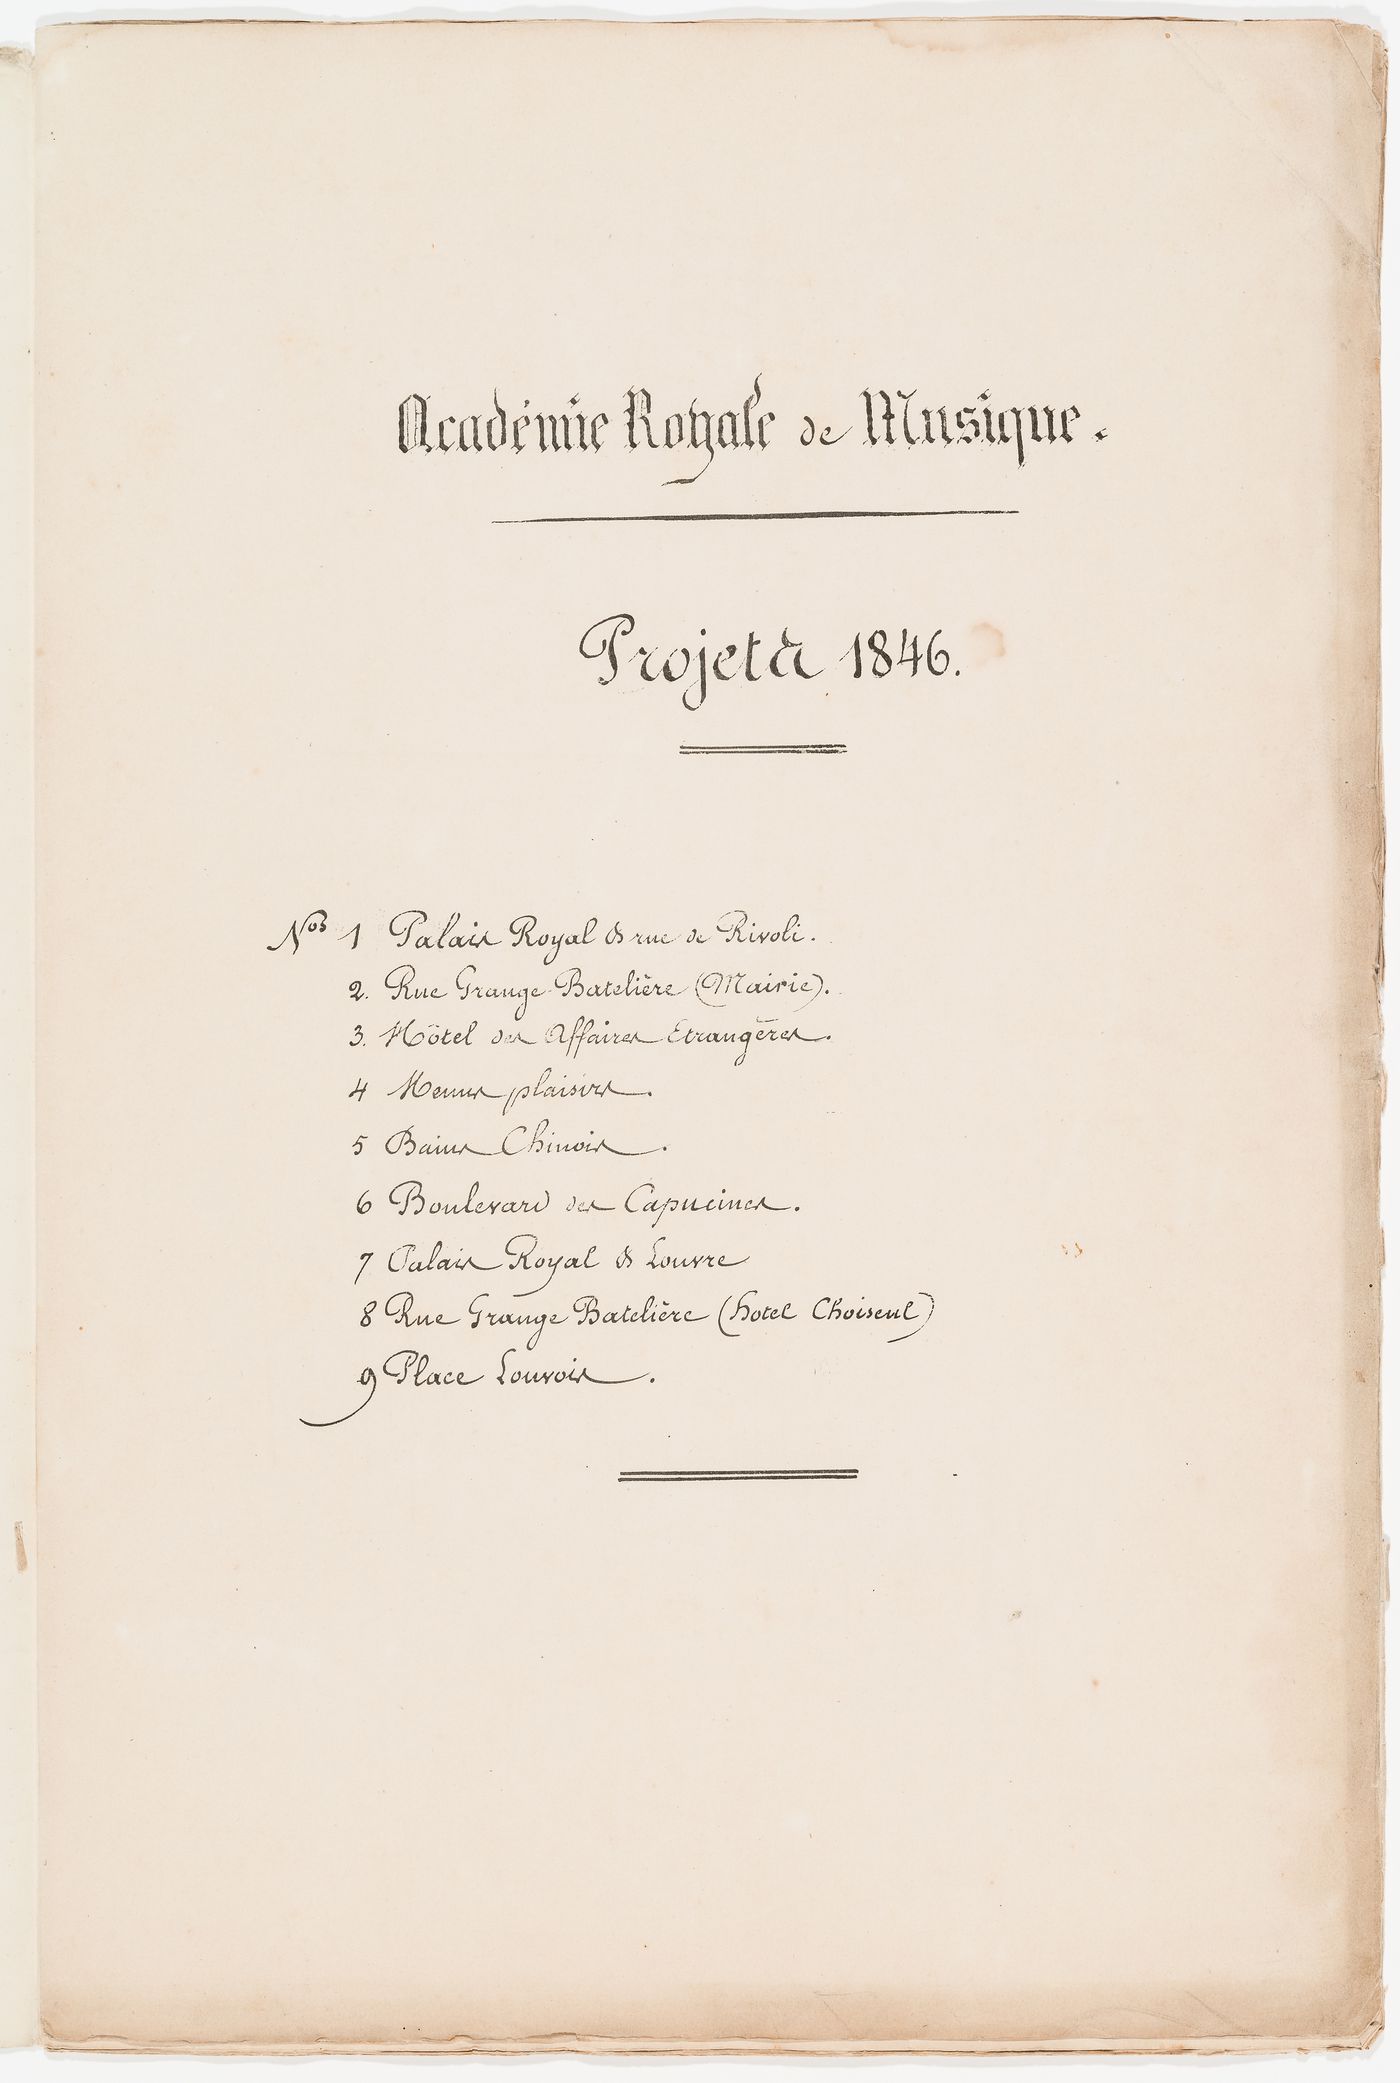 Table of contents listing 9 possible locations for an opera house for the Académie royale de musique; verso: Project no. 9: Site plan for an opera house for the Académie royale de musique, place Louvois